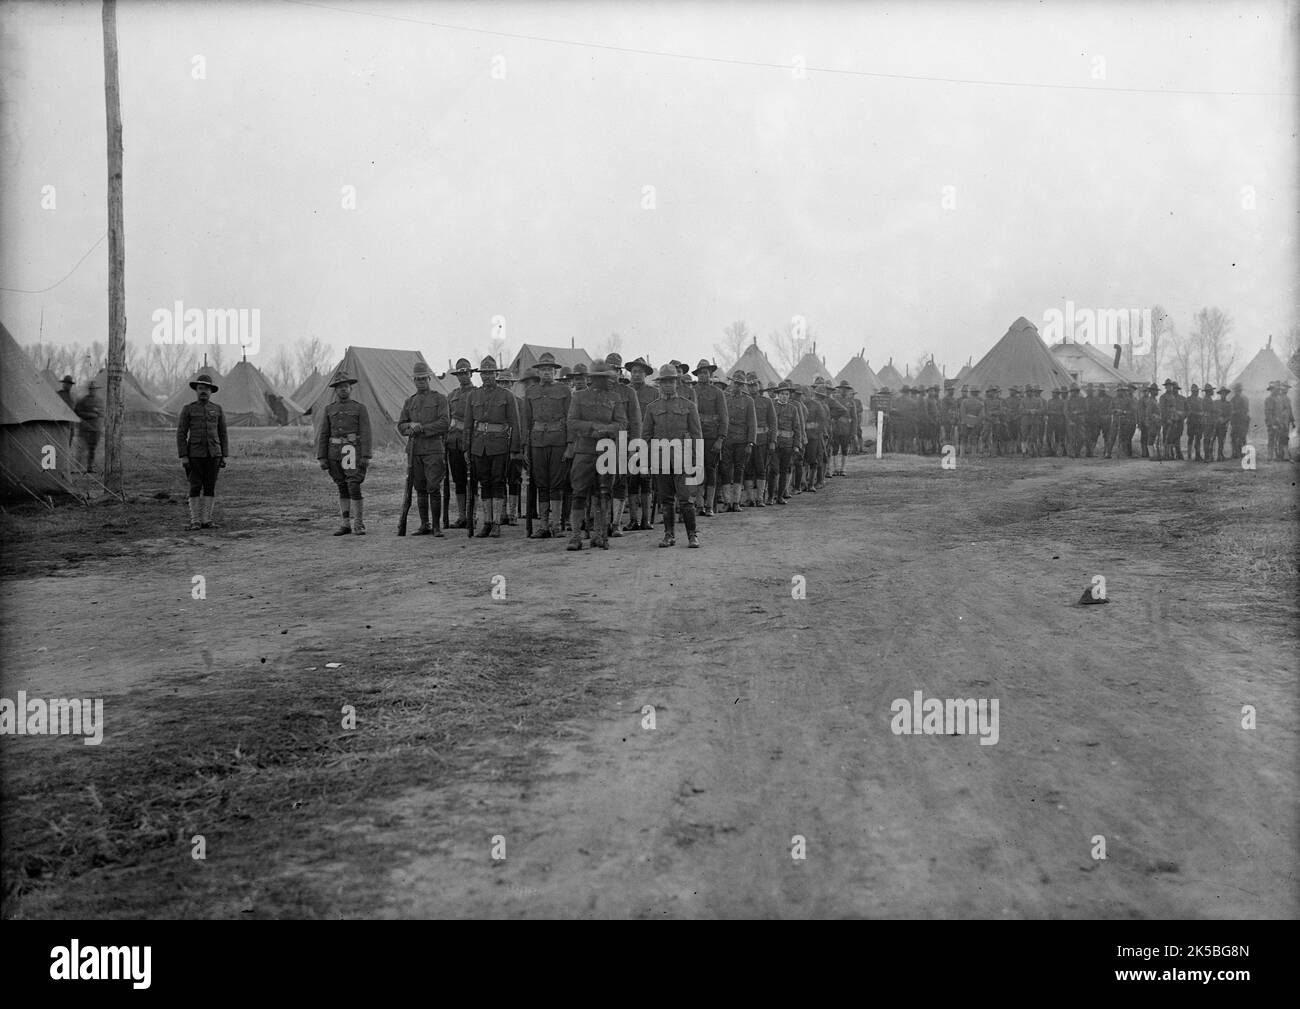 Army, U.S. Colored Soldiers, 1917. (African American soldiers). Stock Photo